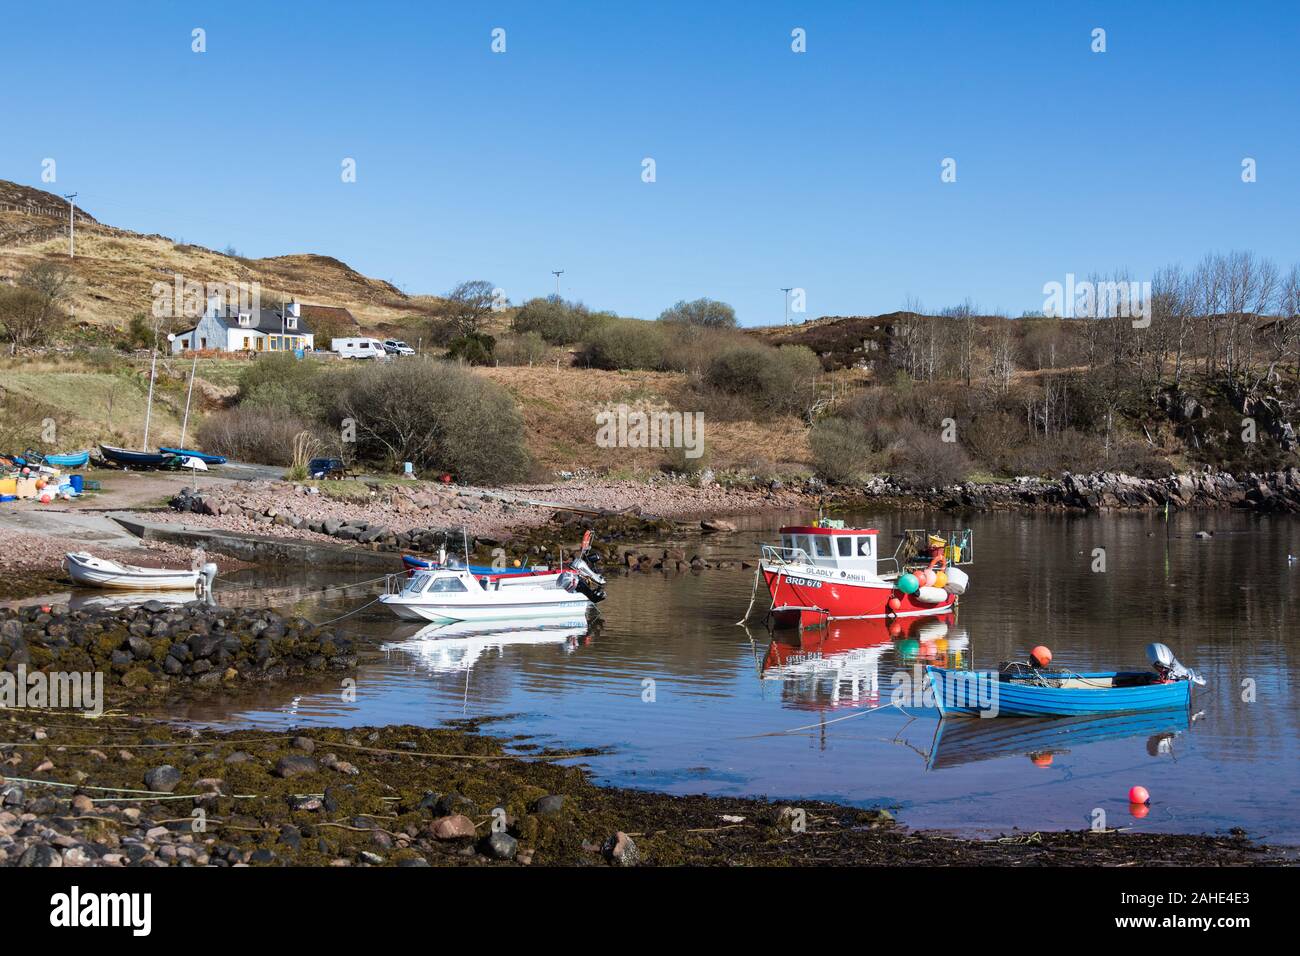 Fishing boats in Cove, located on the northwestern shore of Loch Ewe, Poolewe, Inverasdale, Ross-shire, Scotland. Stock Photo